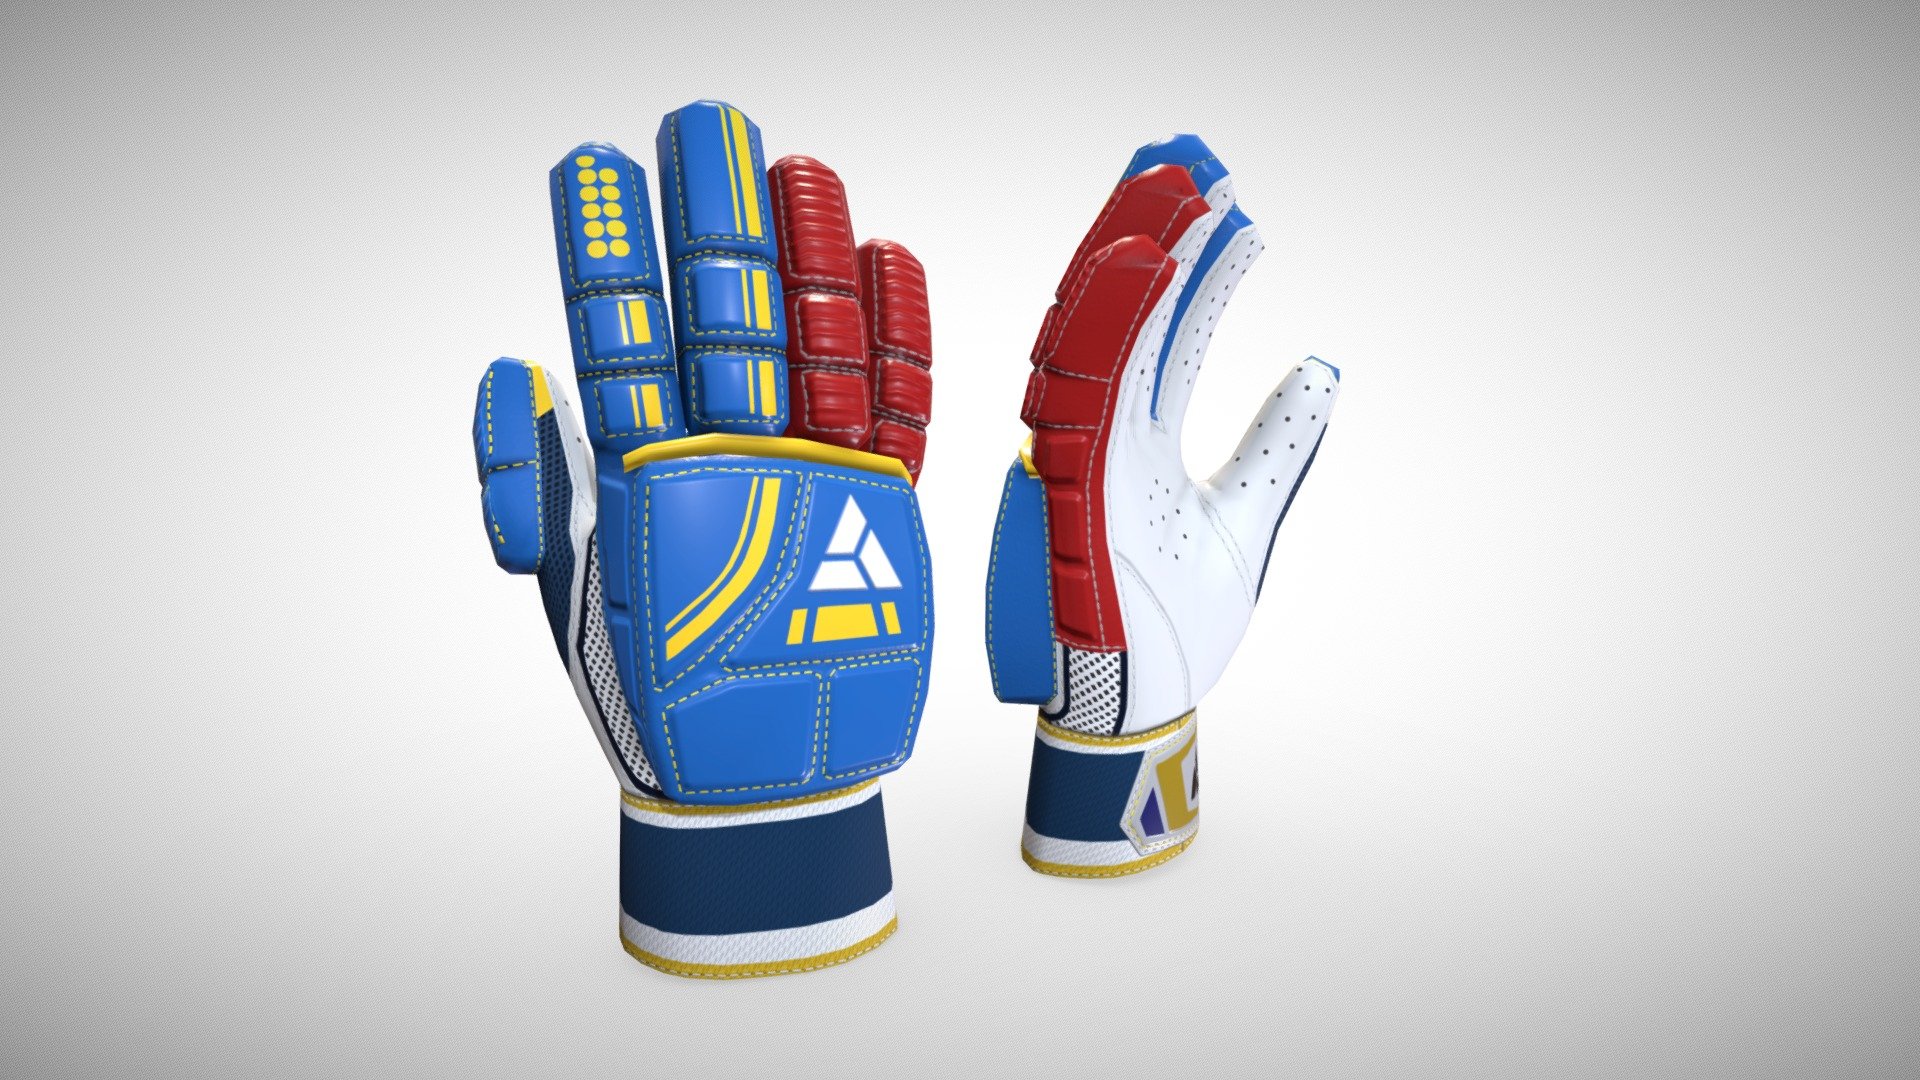 Low poly Cricket gloves for gaming with high quality textures 3d model